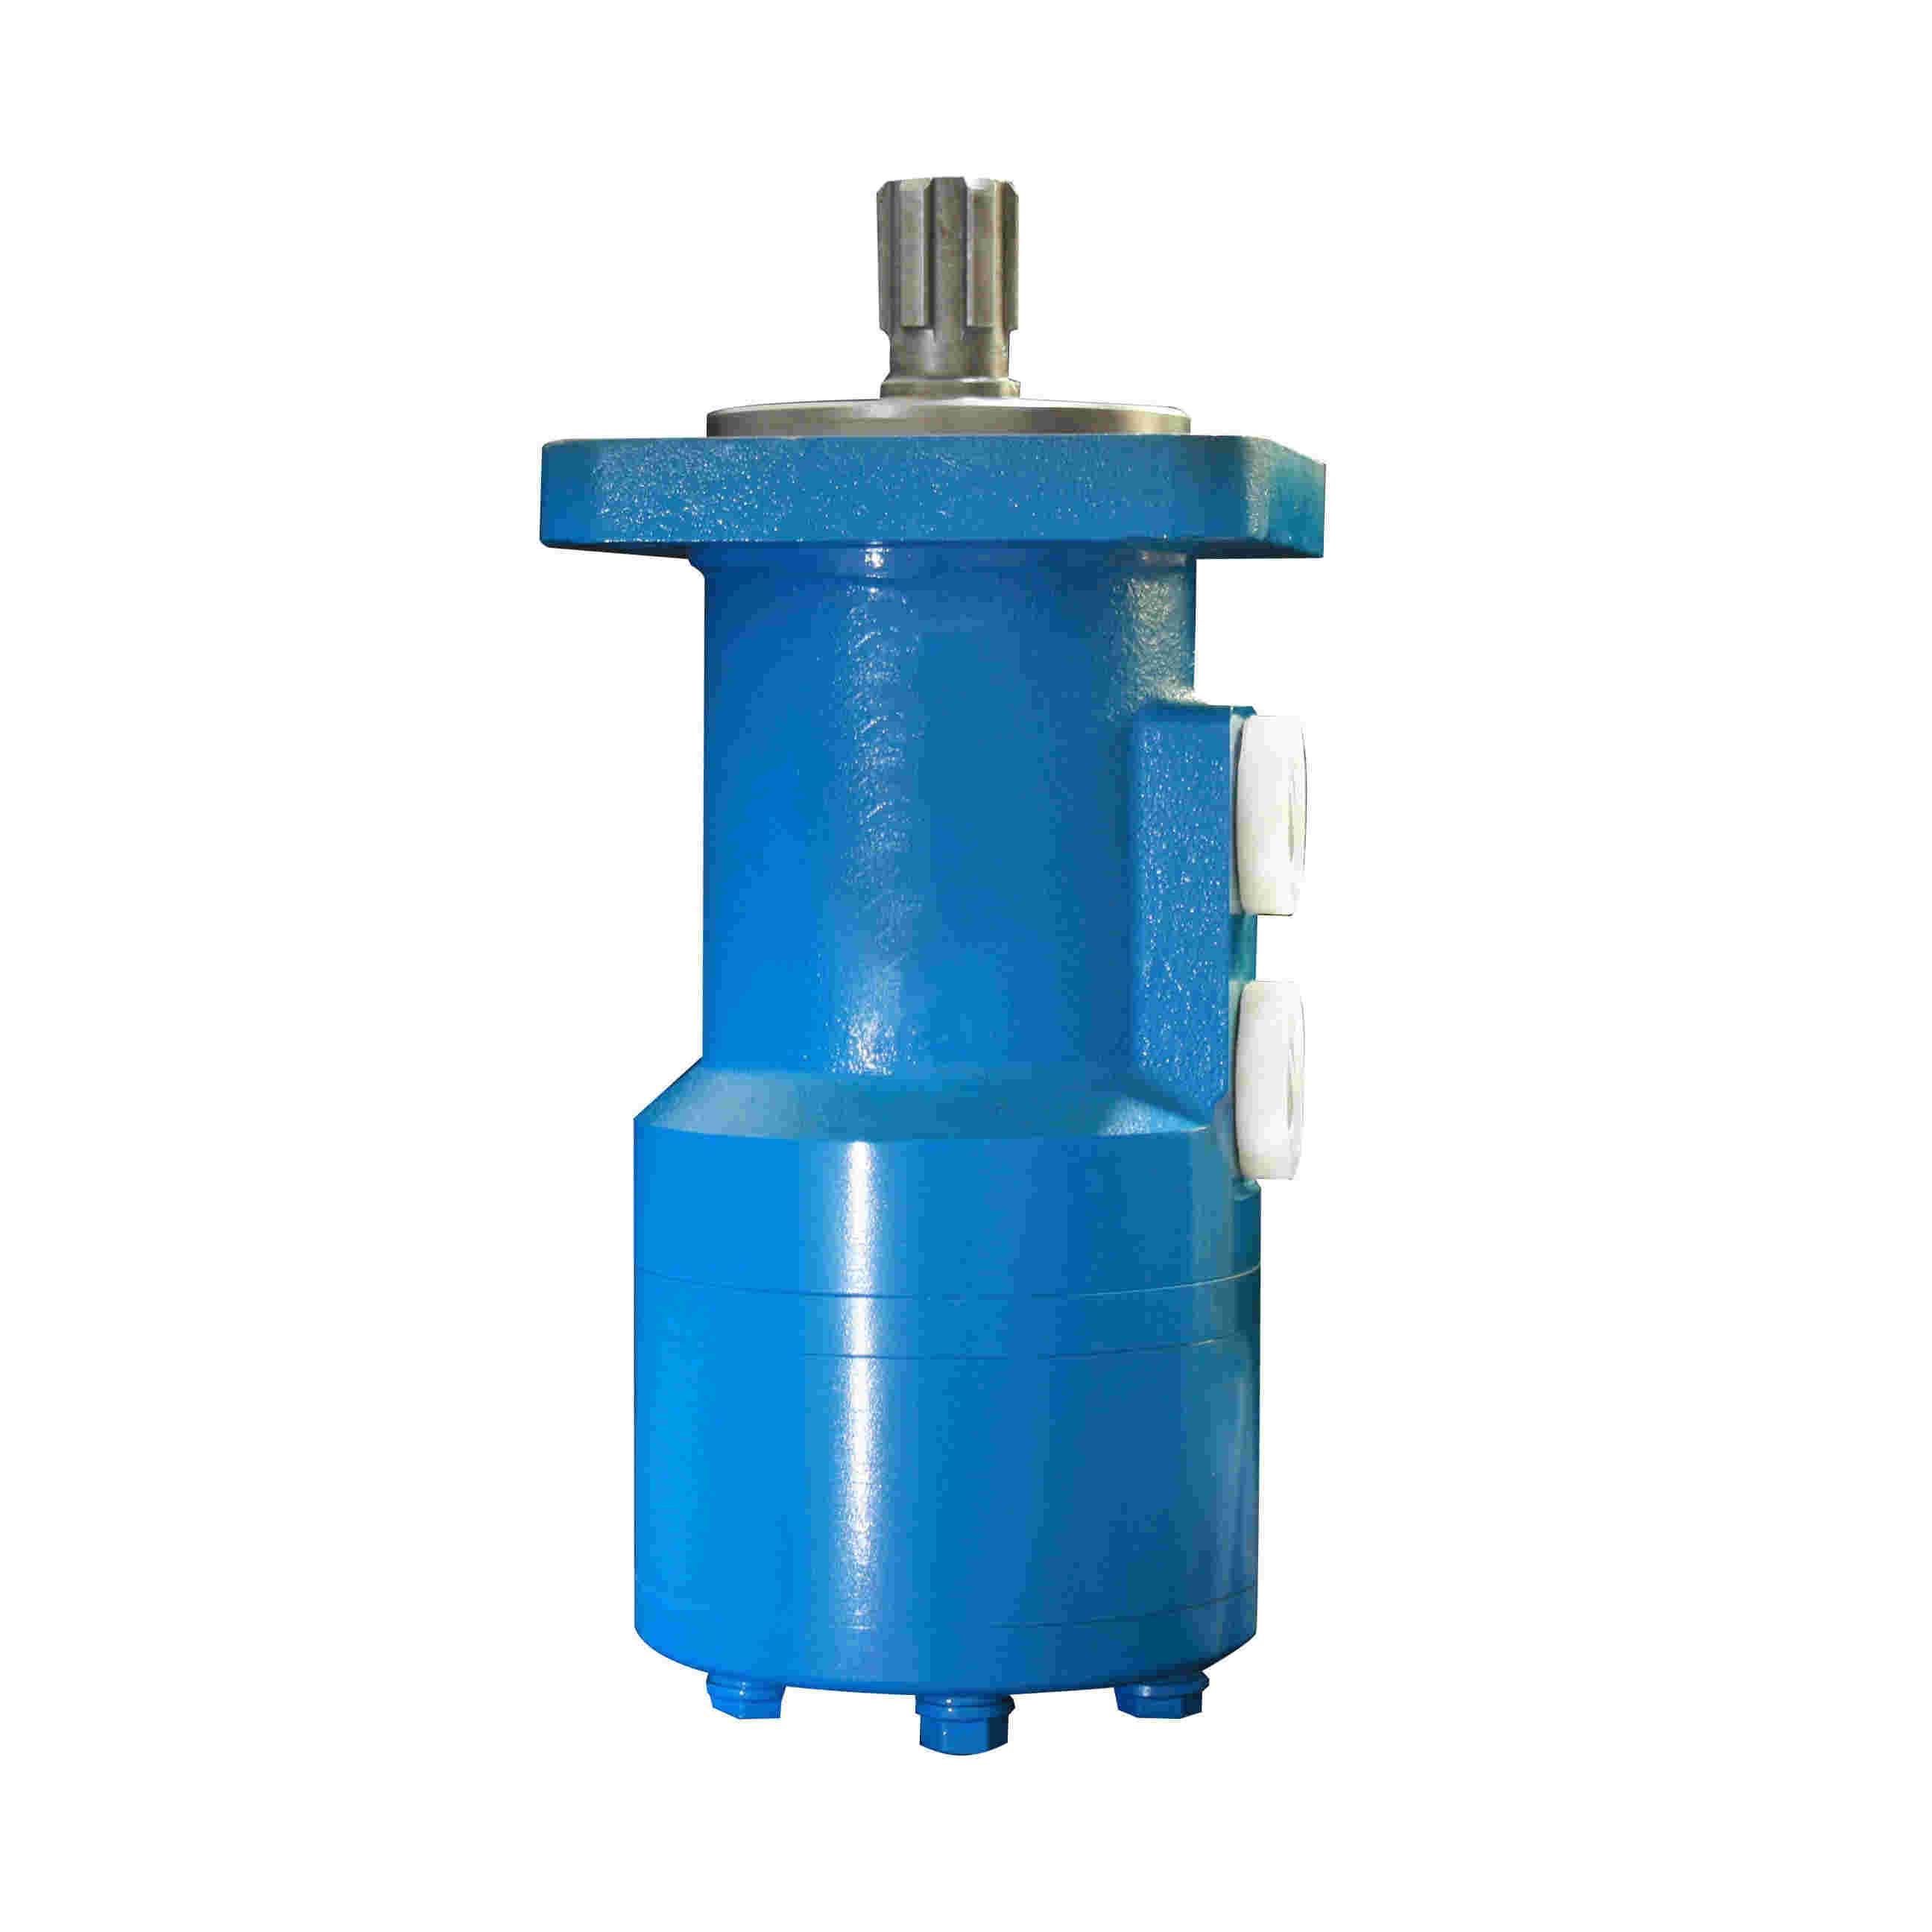 China Low Speed High Torque Hydraulic Motor BM3 Featured Image